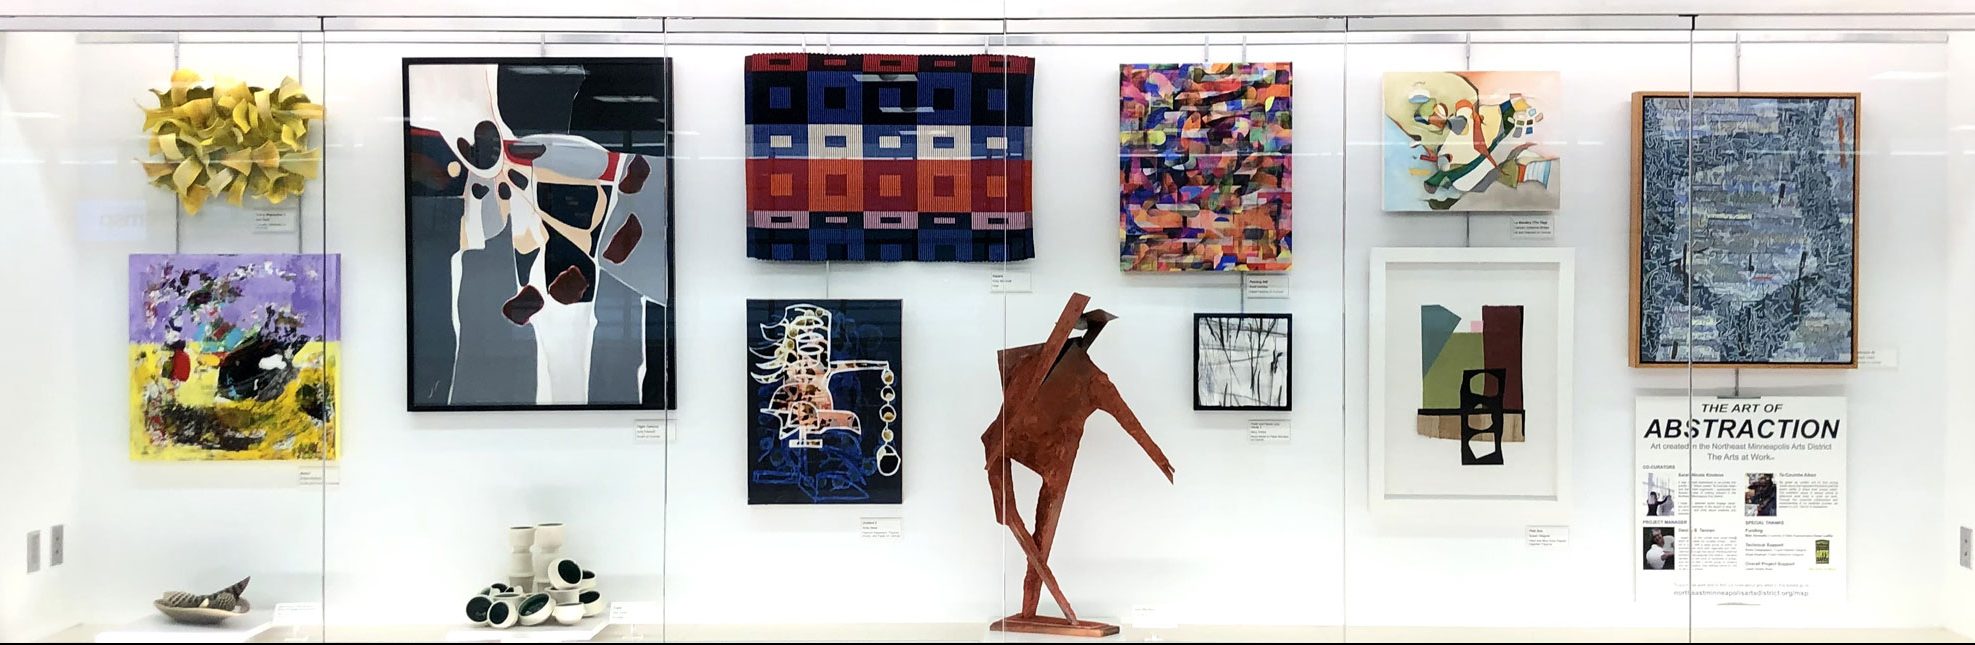 An installation image from a previous exhibition at the airport, showing a number of visual works hung from the wall and standing as sculptures within a large glass display case.